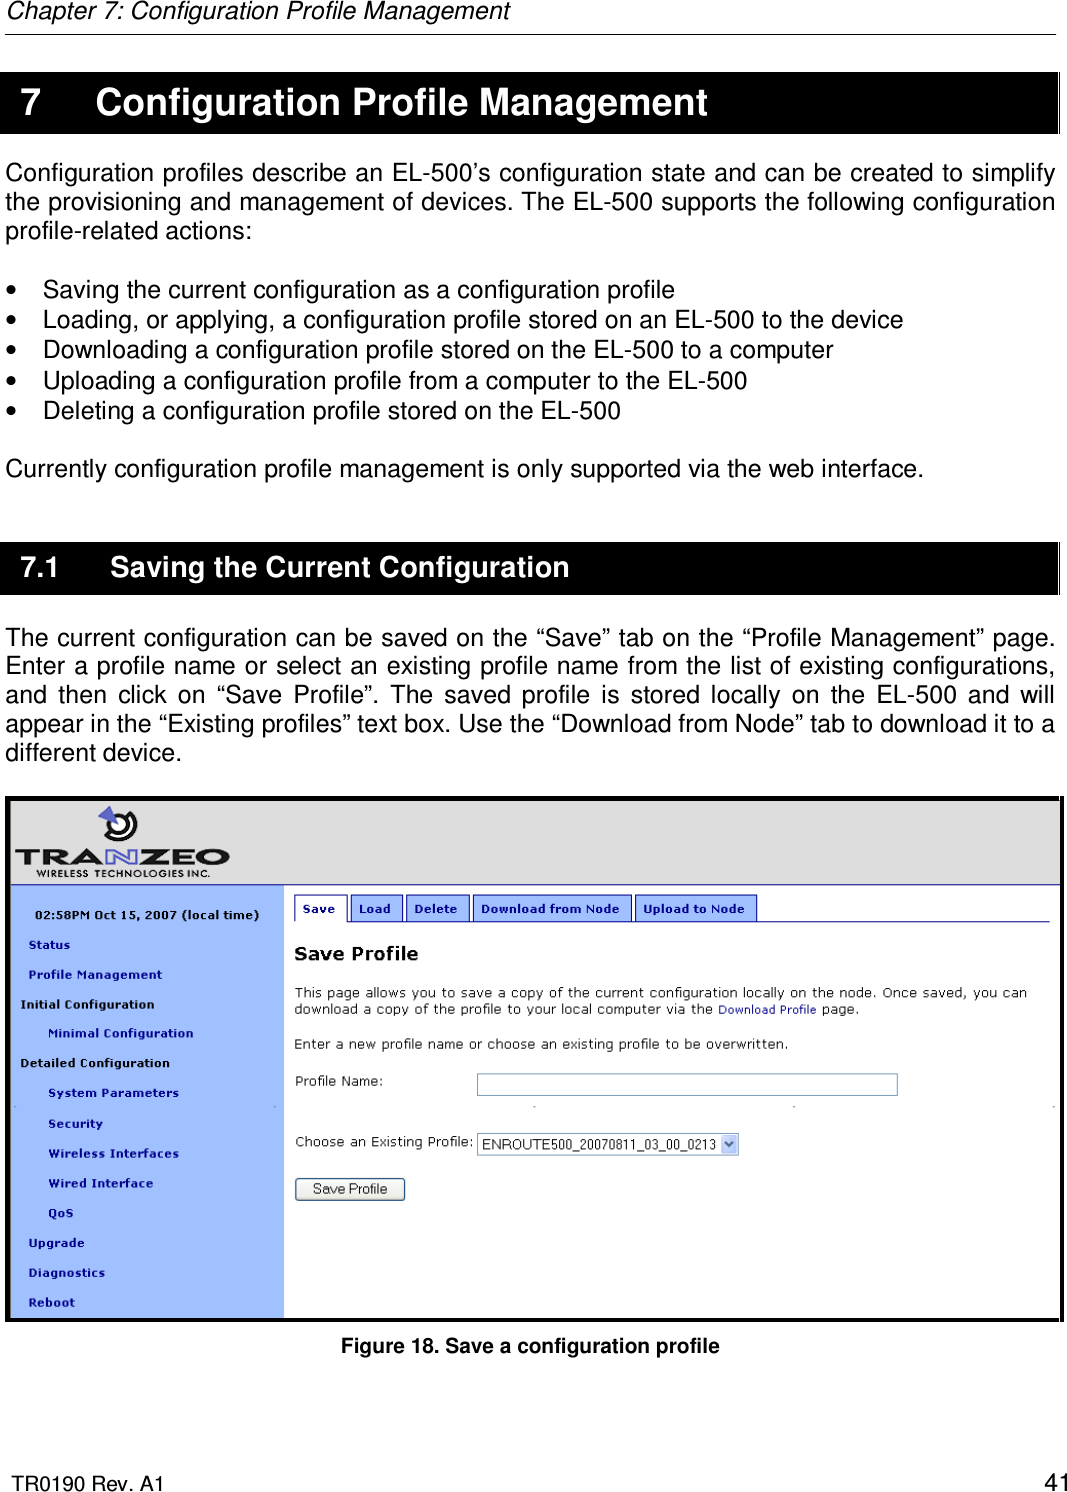 Chapter 7: Configuration Profile Management  TR0190 Rev. A1    41 7  Configuration Profile Management Configuration profiles describe an EL-500’s configuration state and can be created to simplify the provisioning and management of devices. The EL-500 supports the following configuration profile-related actions:  •  Saving the current configuration as a configuration profile •  Loading, or applying, a configuration profile stored on an EL-500 to the device •  Downloading a configuration profile stored on the EL-500 to a computer •  Uploading a configuration profile from a computer to the EL-500 •  Deleting a configuration profile stored on the EL-500  Currently configuration profile management is only supported via the web interface.  7.1  Saving the Current Configuration The current configuration can be saved on the “Save” tab on the “Profile Management” page. Enter a profile name or select an existing profile name from the list of existing configurations, and  then  click  on  “Save  Profile”.  The  saved  profile  is  stored  locally  on  the  EL-500  and  will appear in the “Existing profiles” text box. Use the “Download from Node” tab to download it to a different device.   Figure 18. Save a configuration profile 